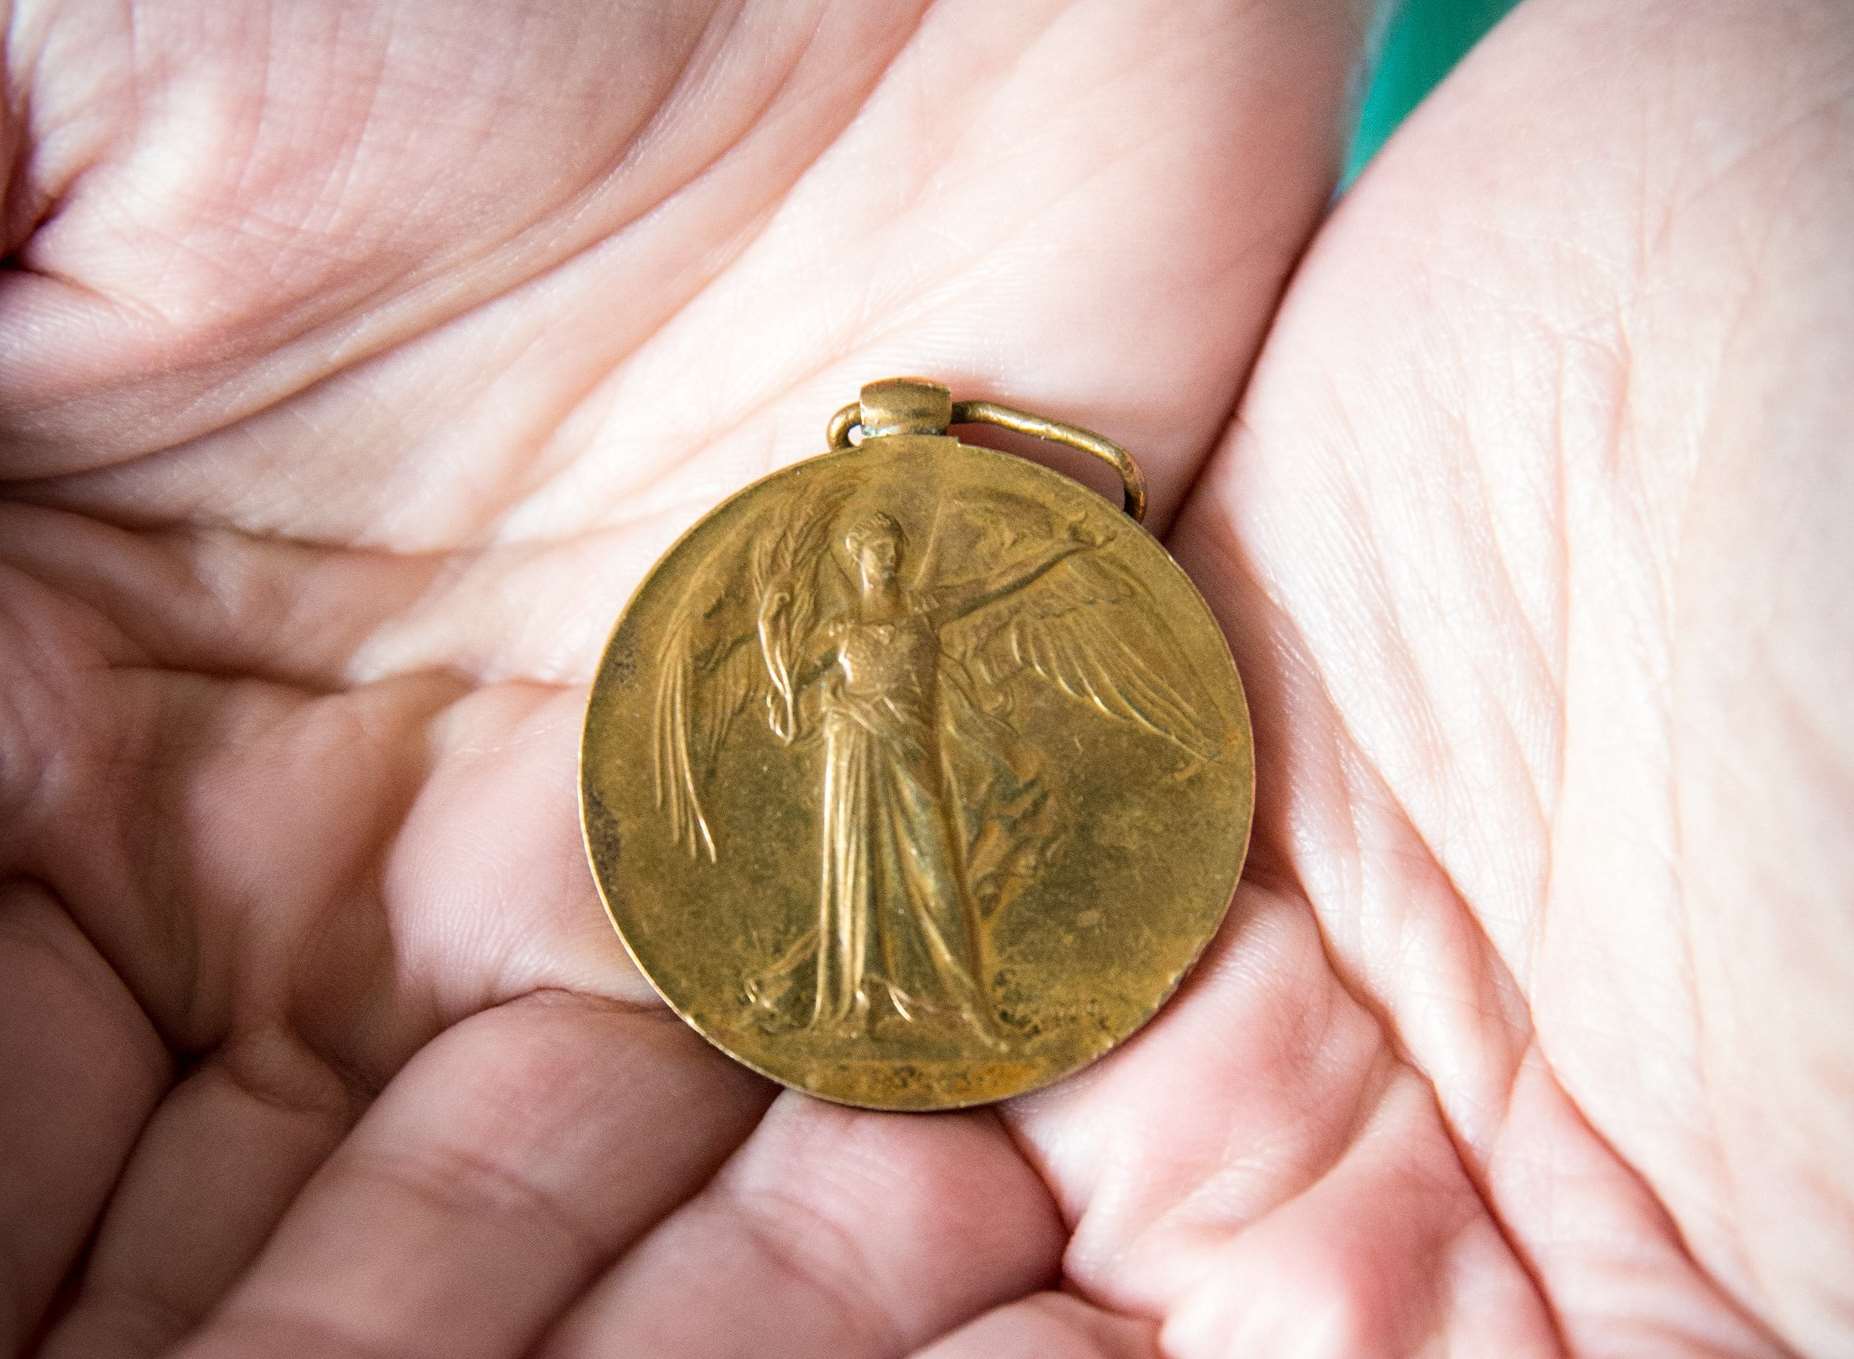 Pictures of a Victory Medal found by Lynn Coomber's late father